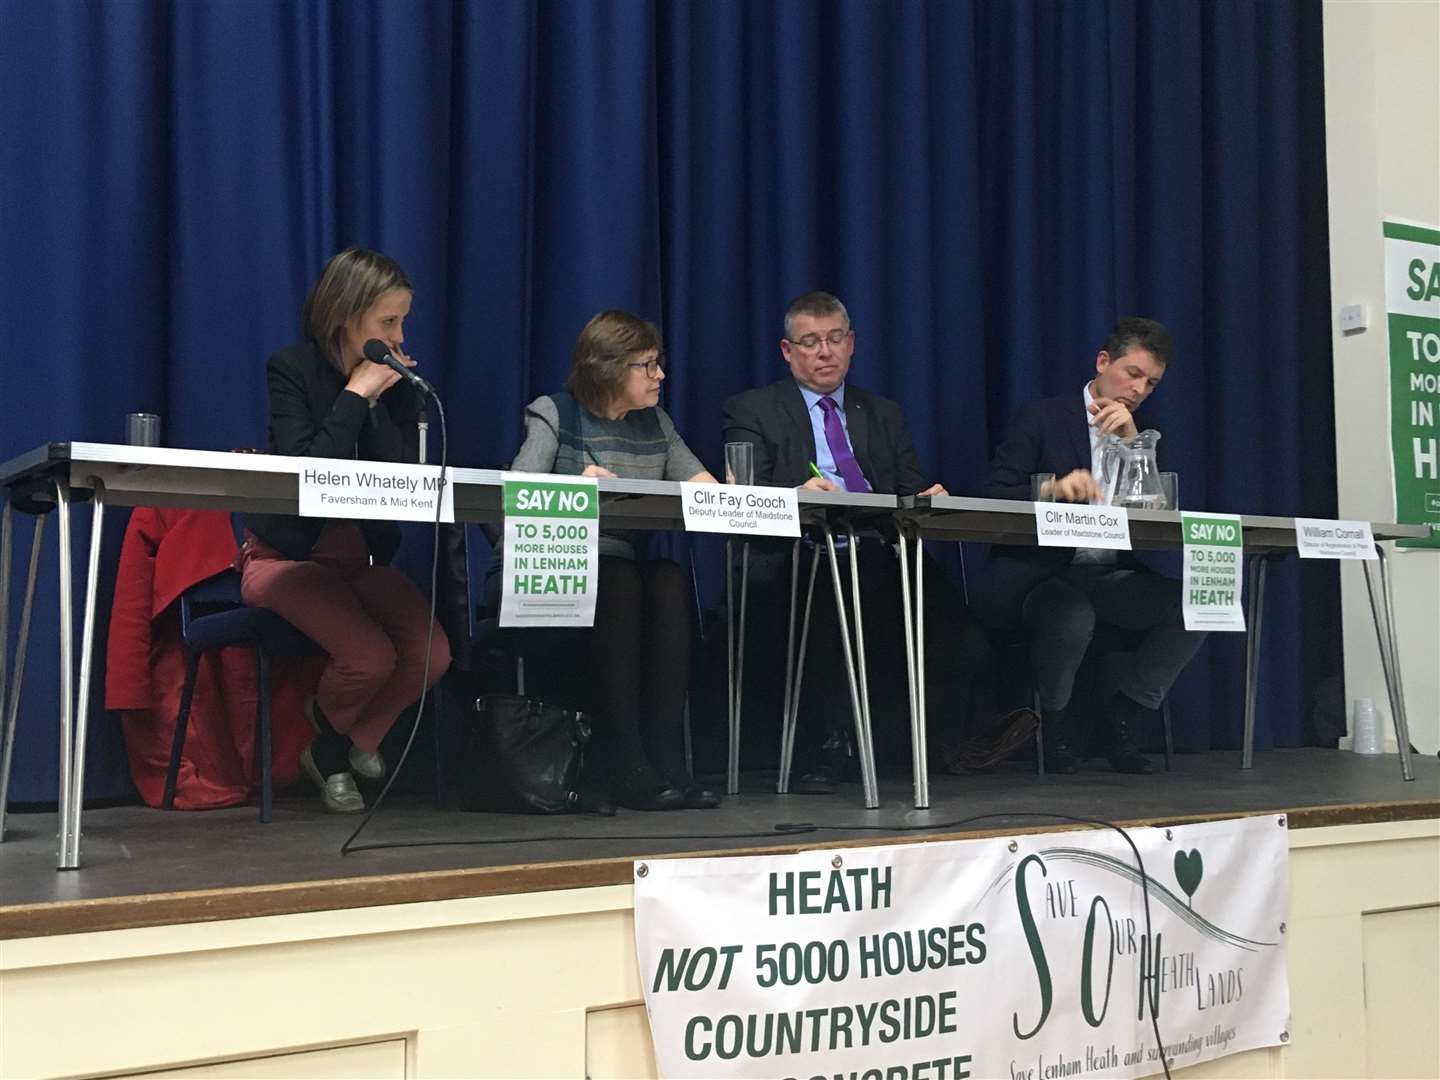 Helen Whately, Fay Gooch, Martin Cox and William Cornall discuss the Lenham Heath proposals (27538591)